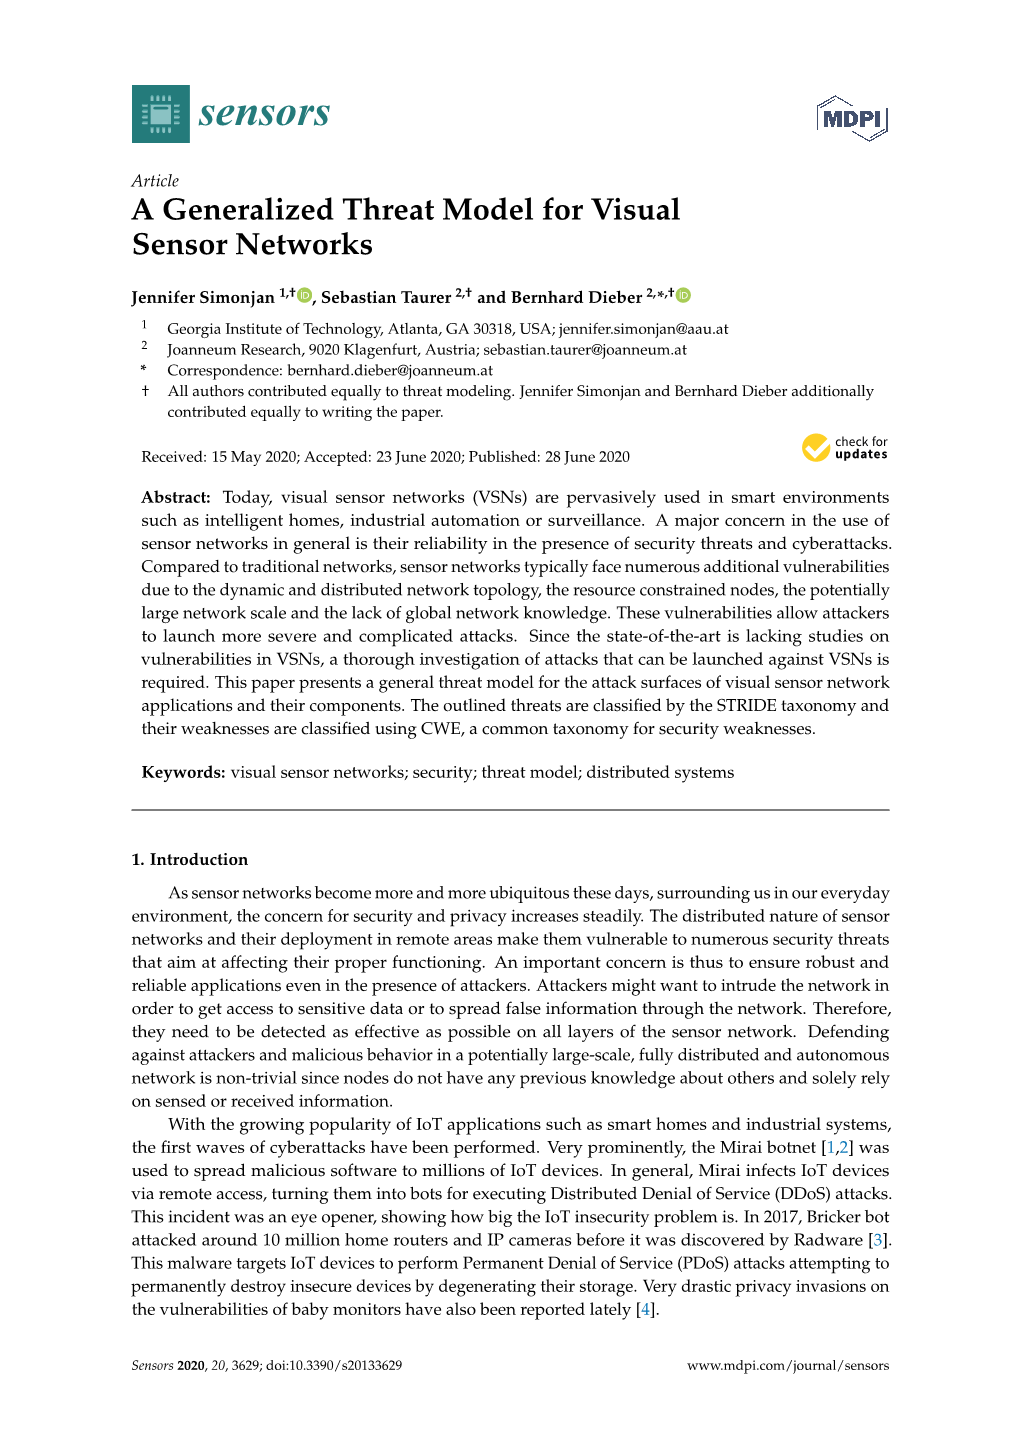 A Generalized Threat Model for Visual Sensor Networks